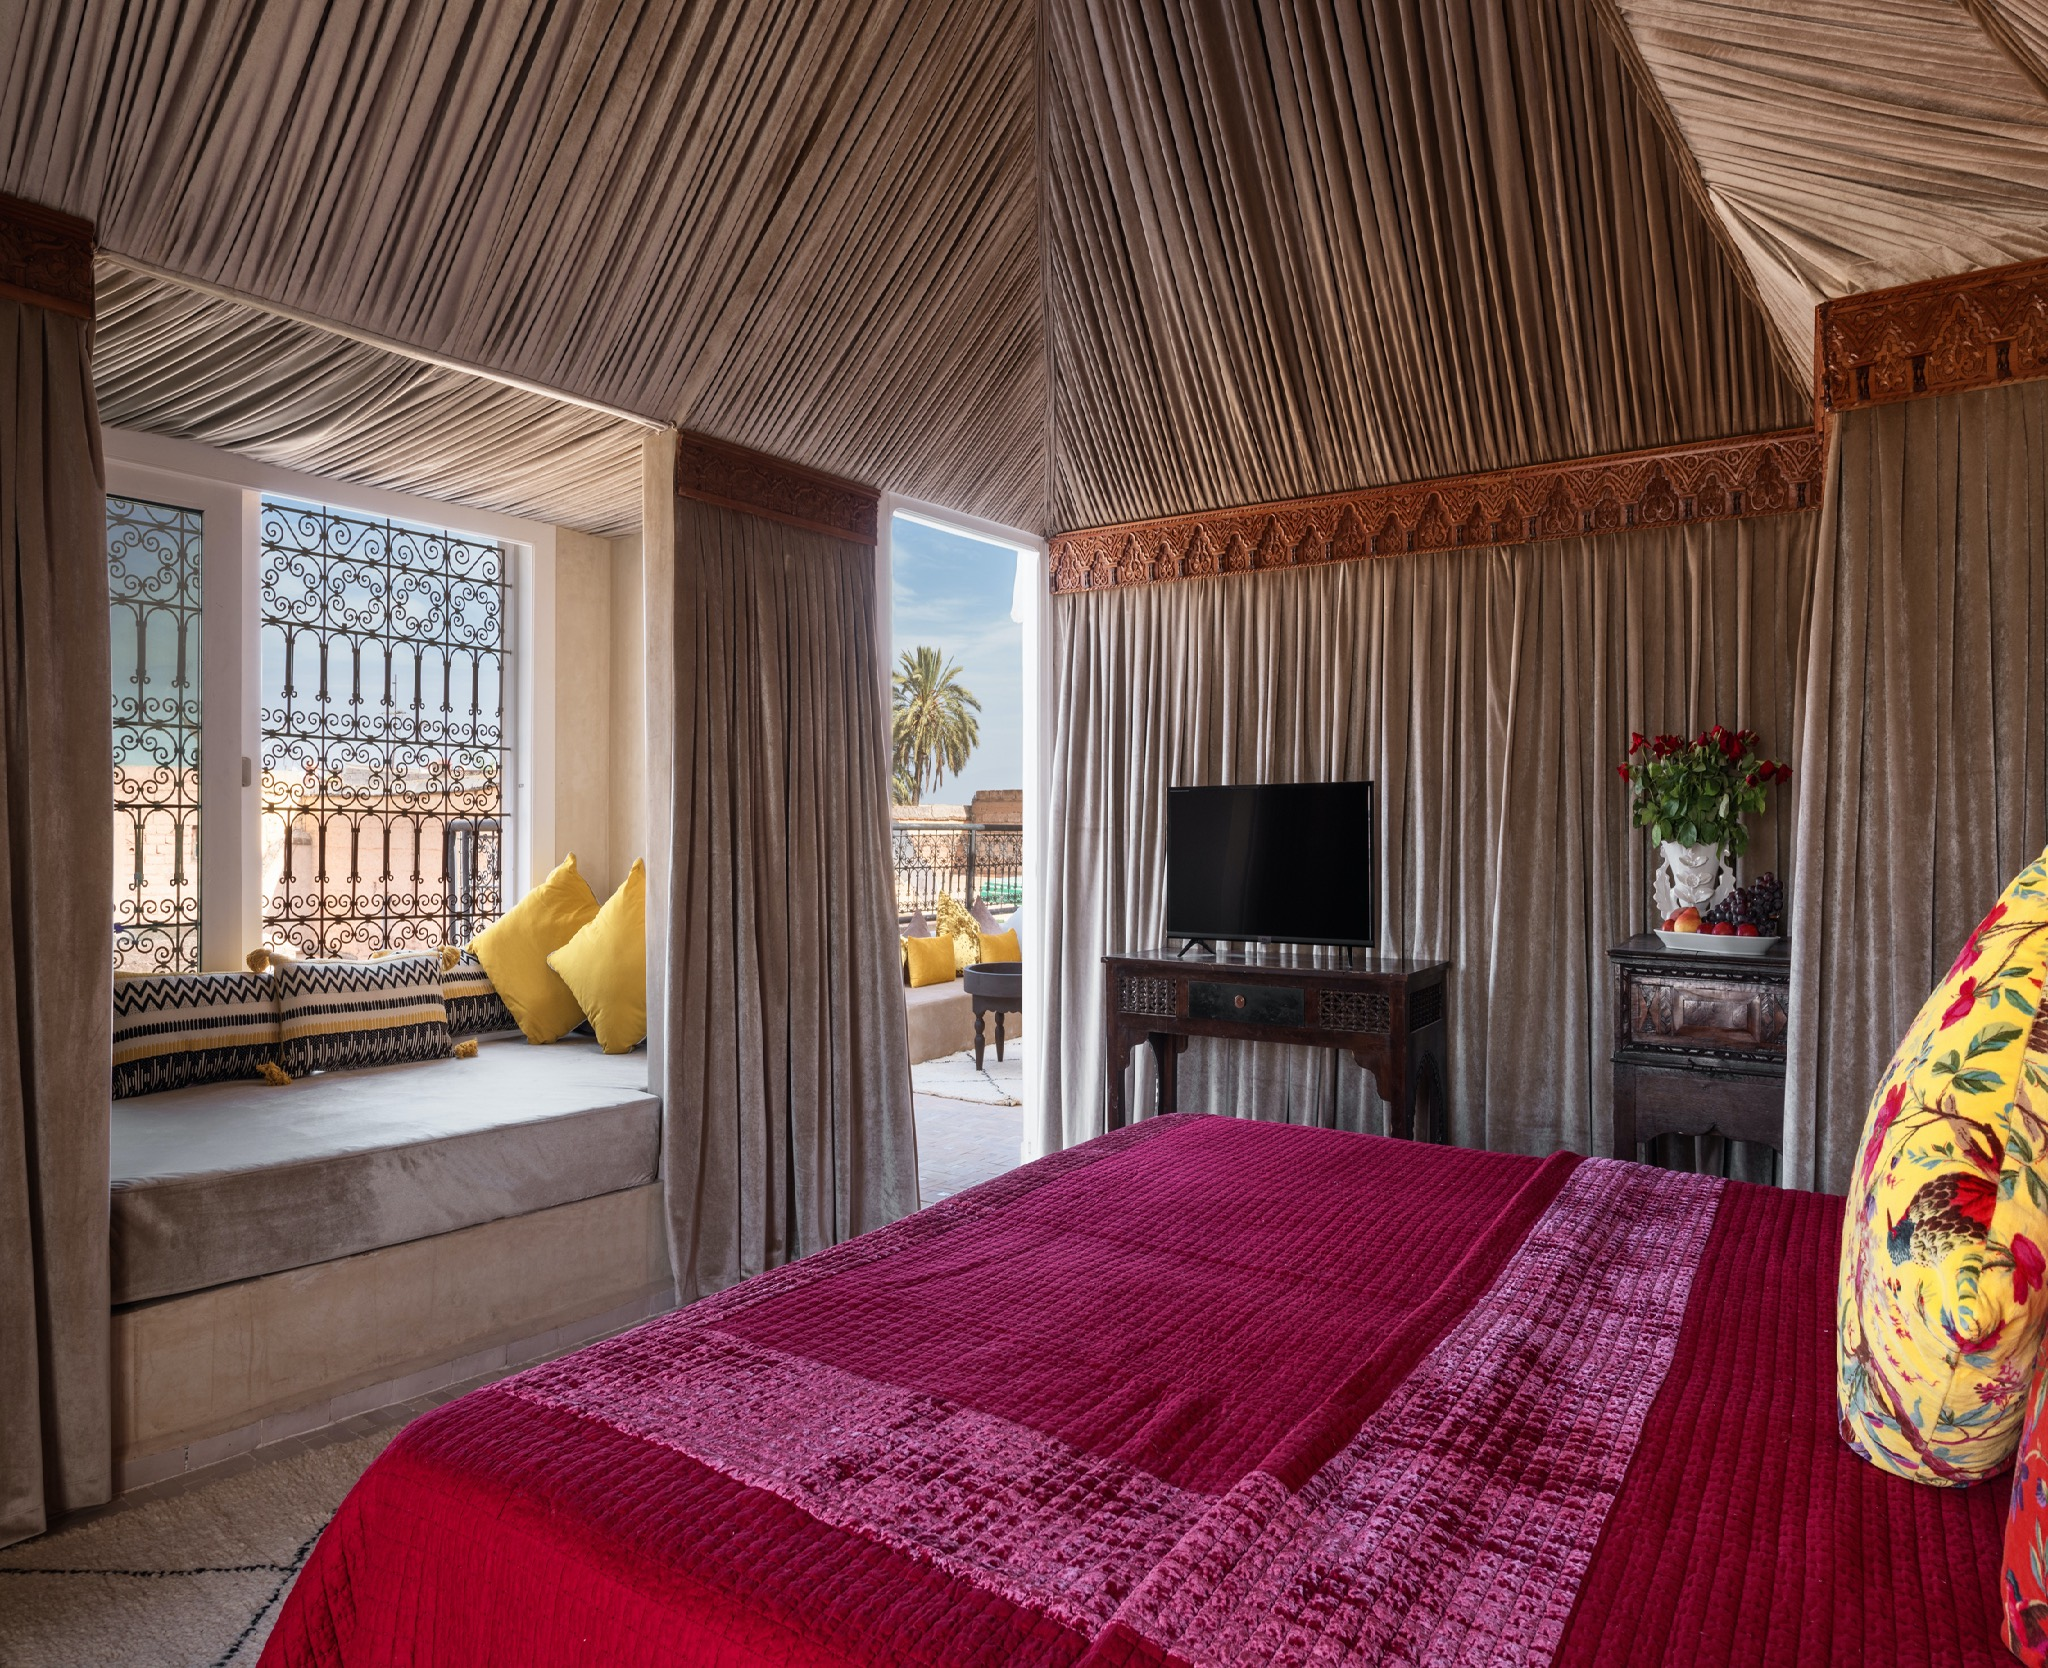 Paradise room, Riad Spice moroccan tent